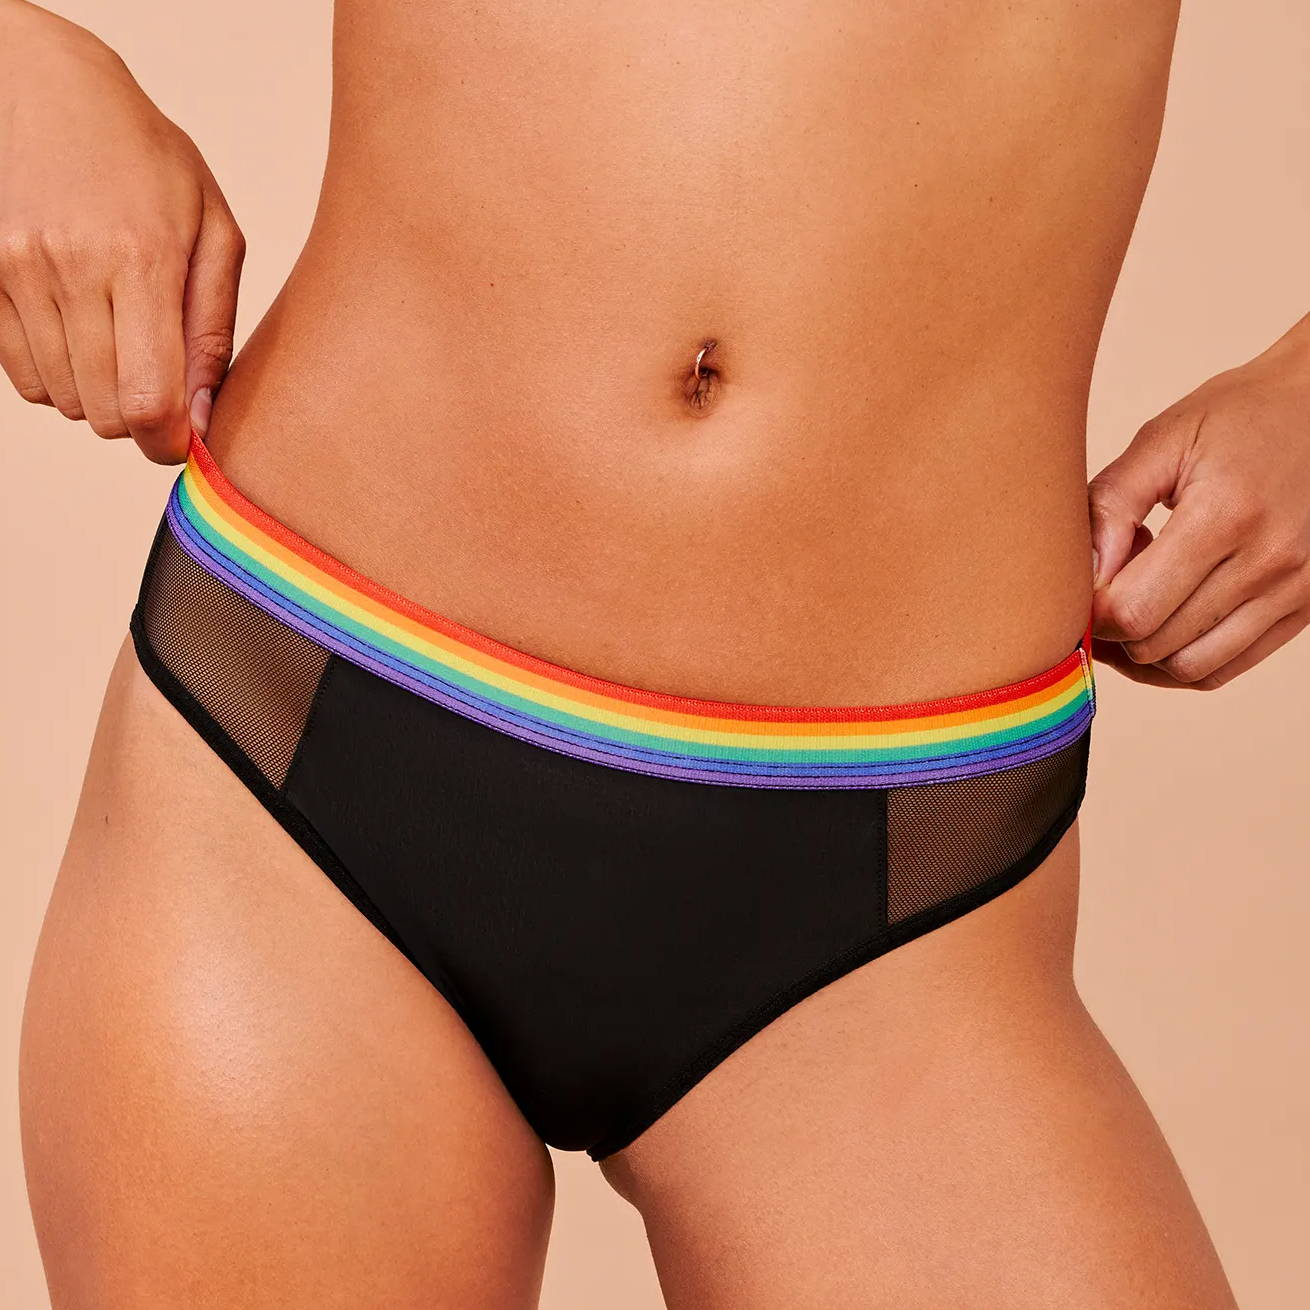 a cup bra the best bras for small busts in rainbow pride with matching underwear